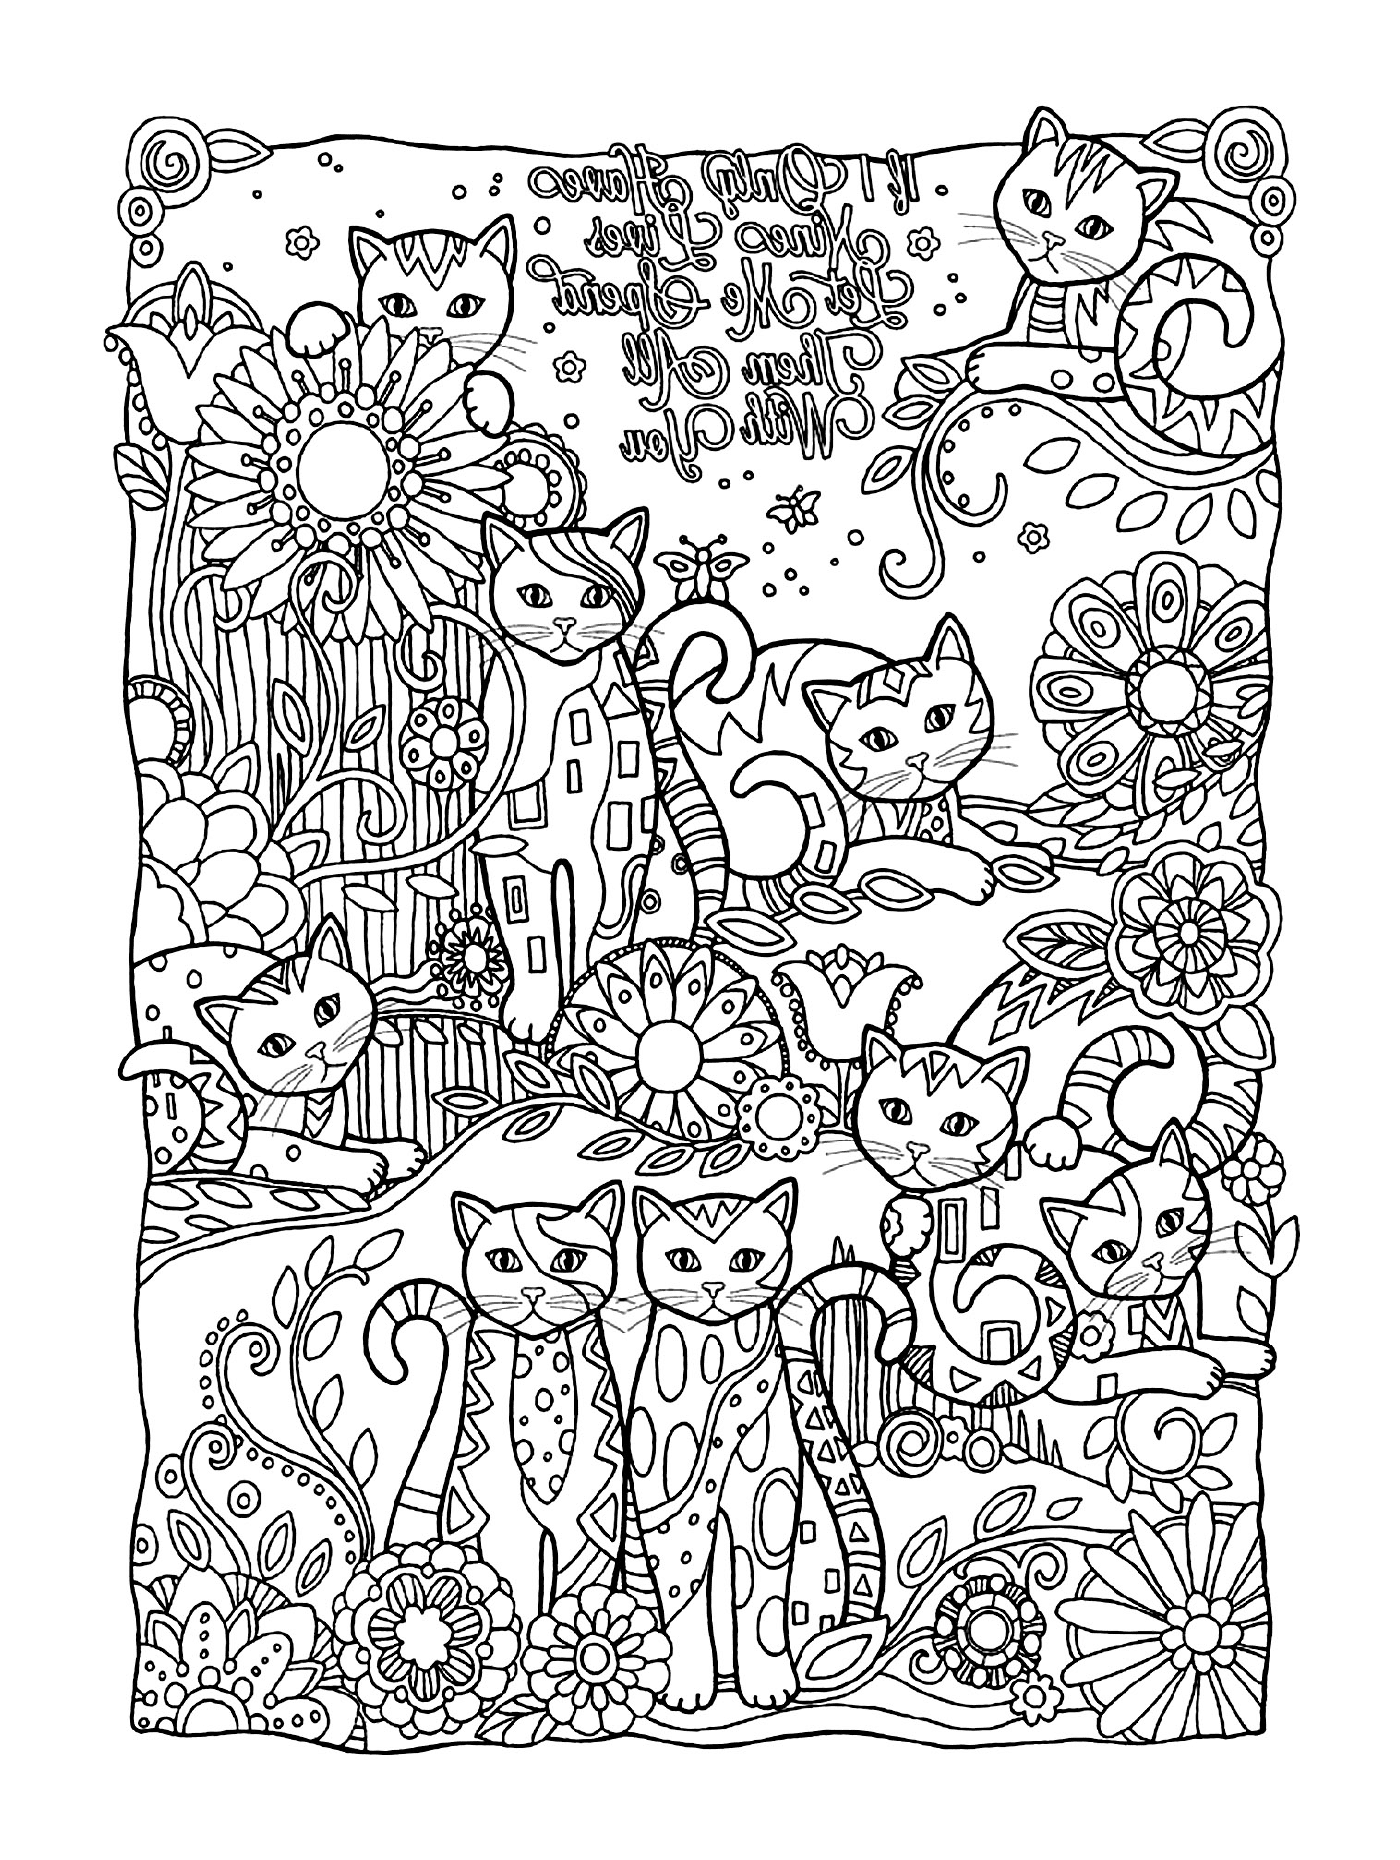  Lots of cats with adult patterns 